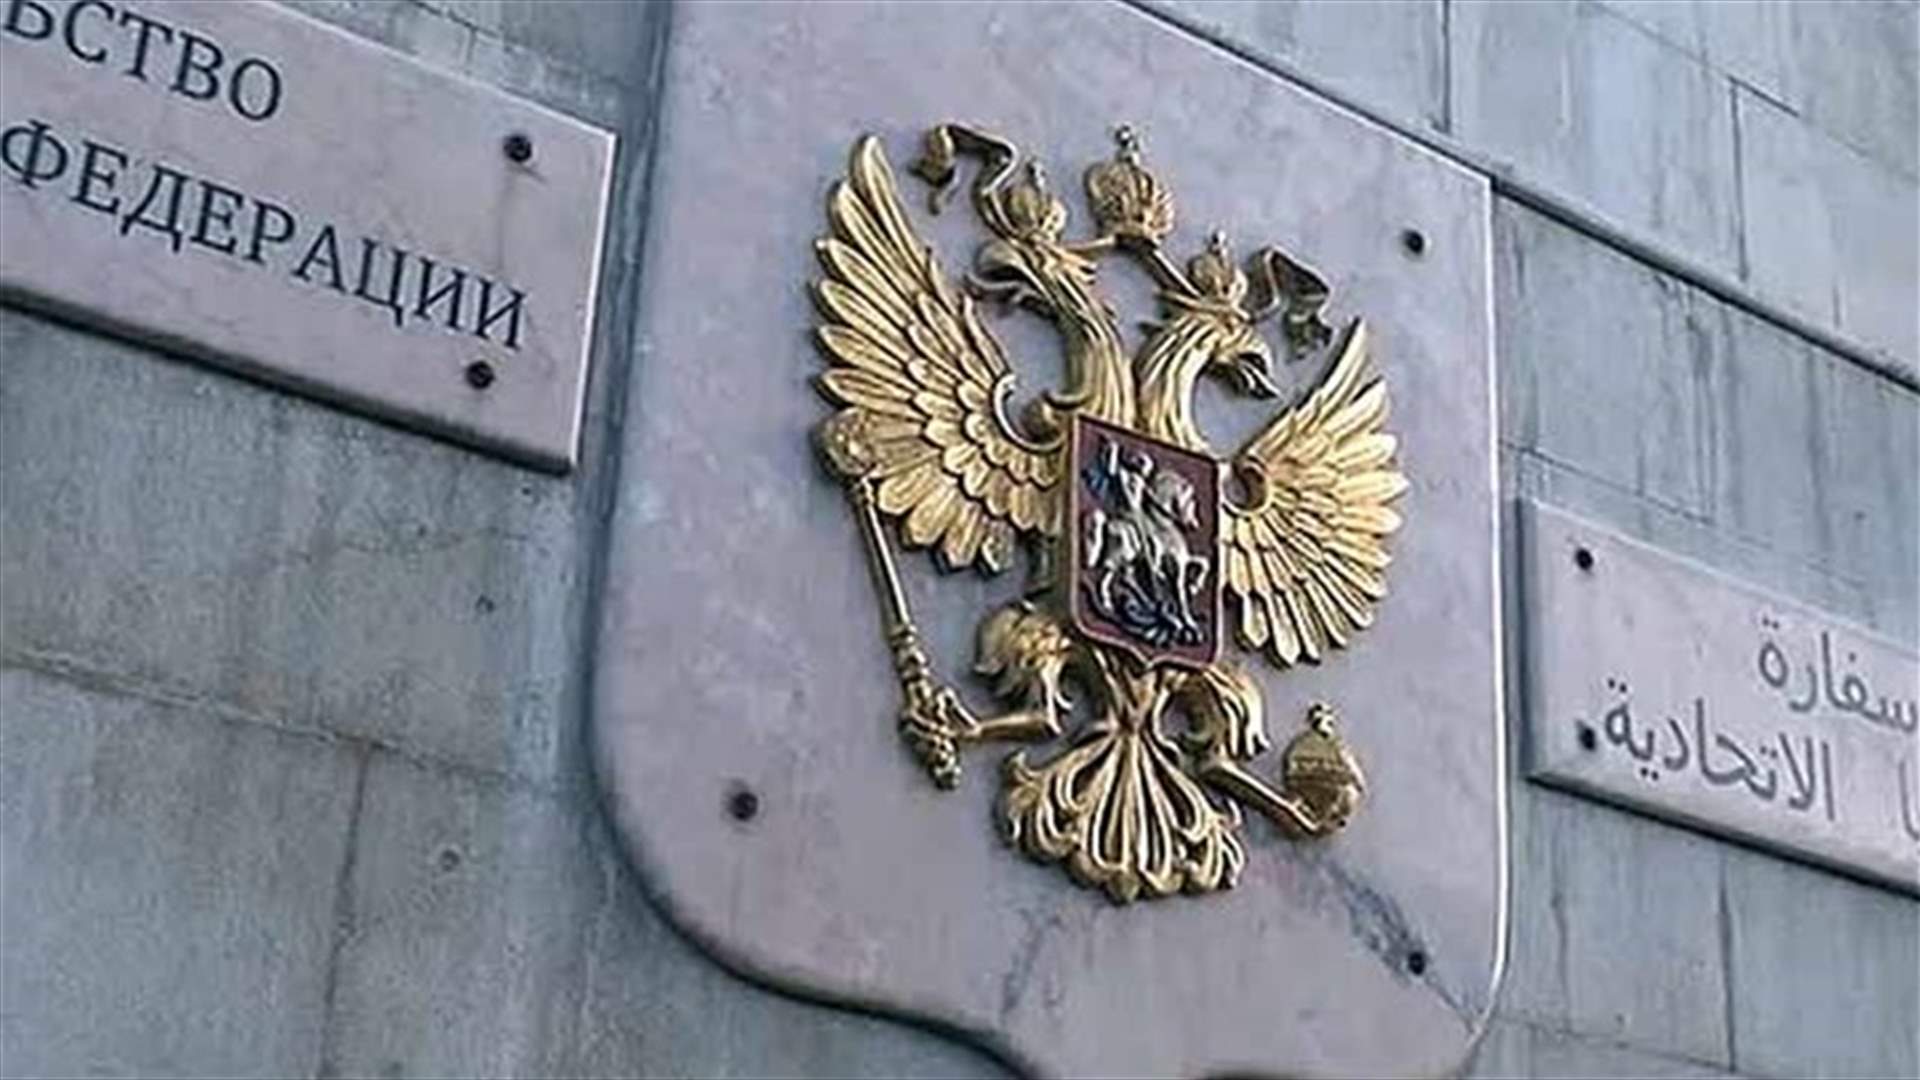 Russia says Damascus embassy targeted in mortar attack, no staff hurt